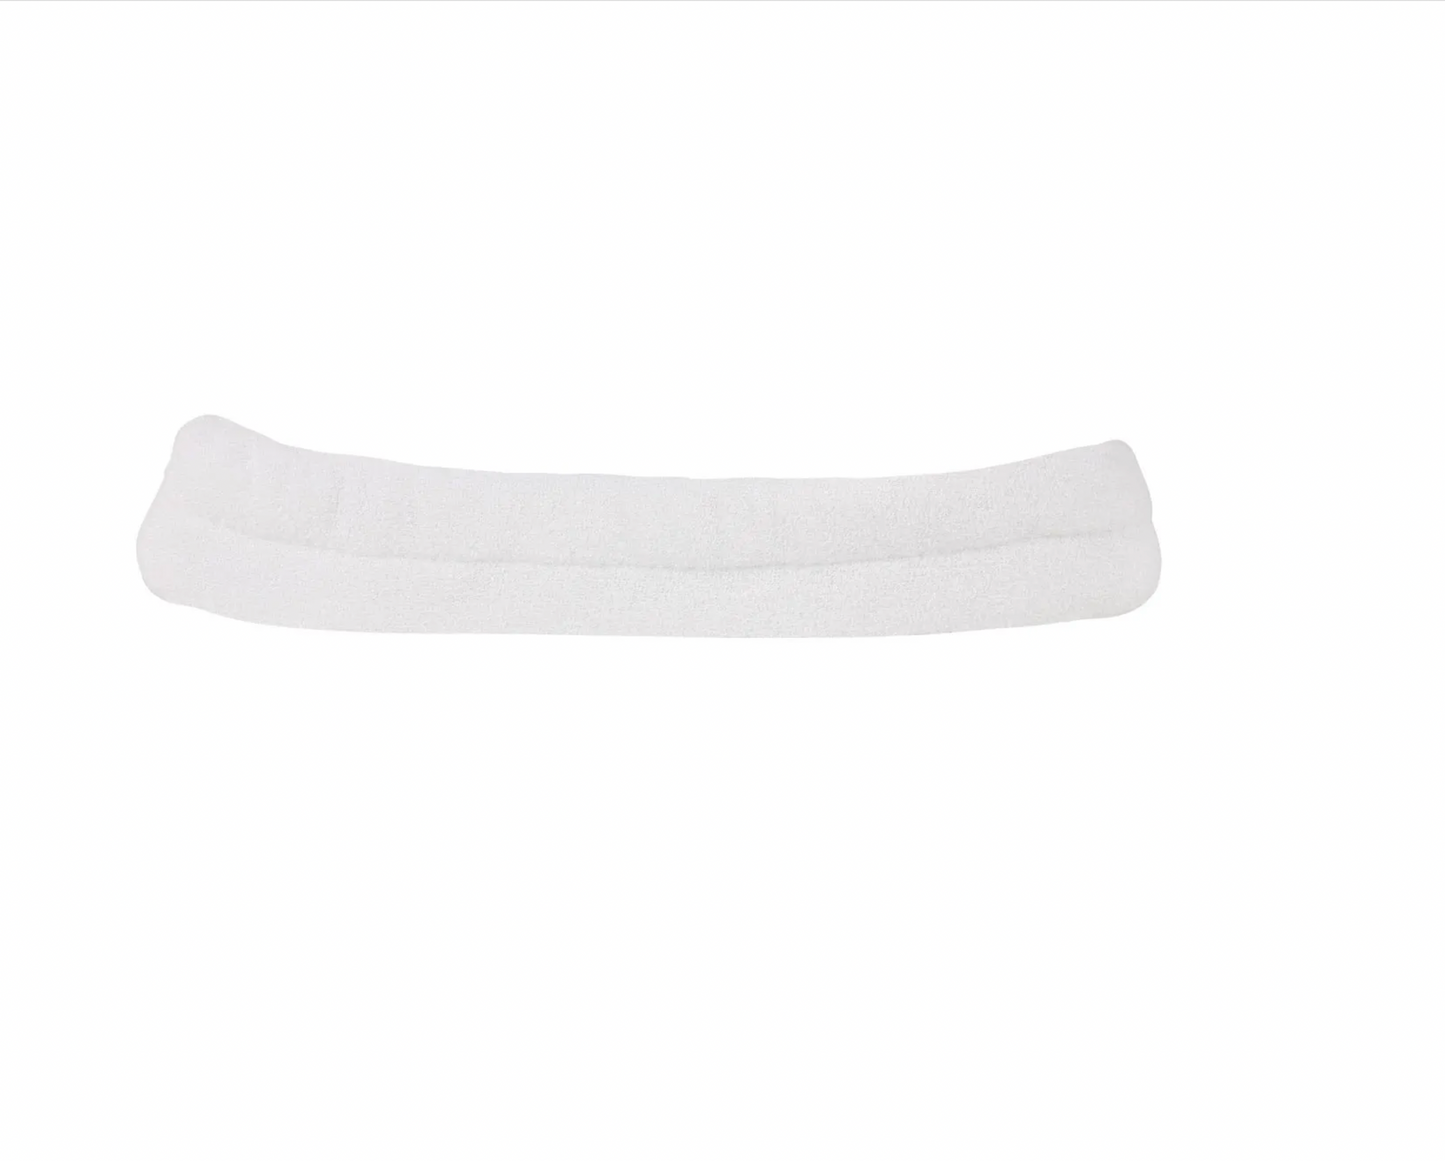 A&R blade cover soakers - white